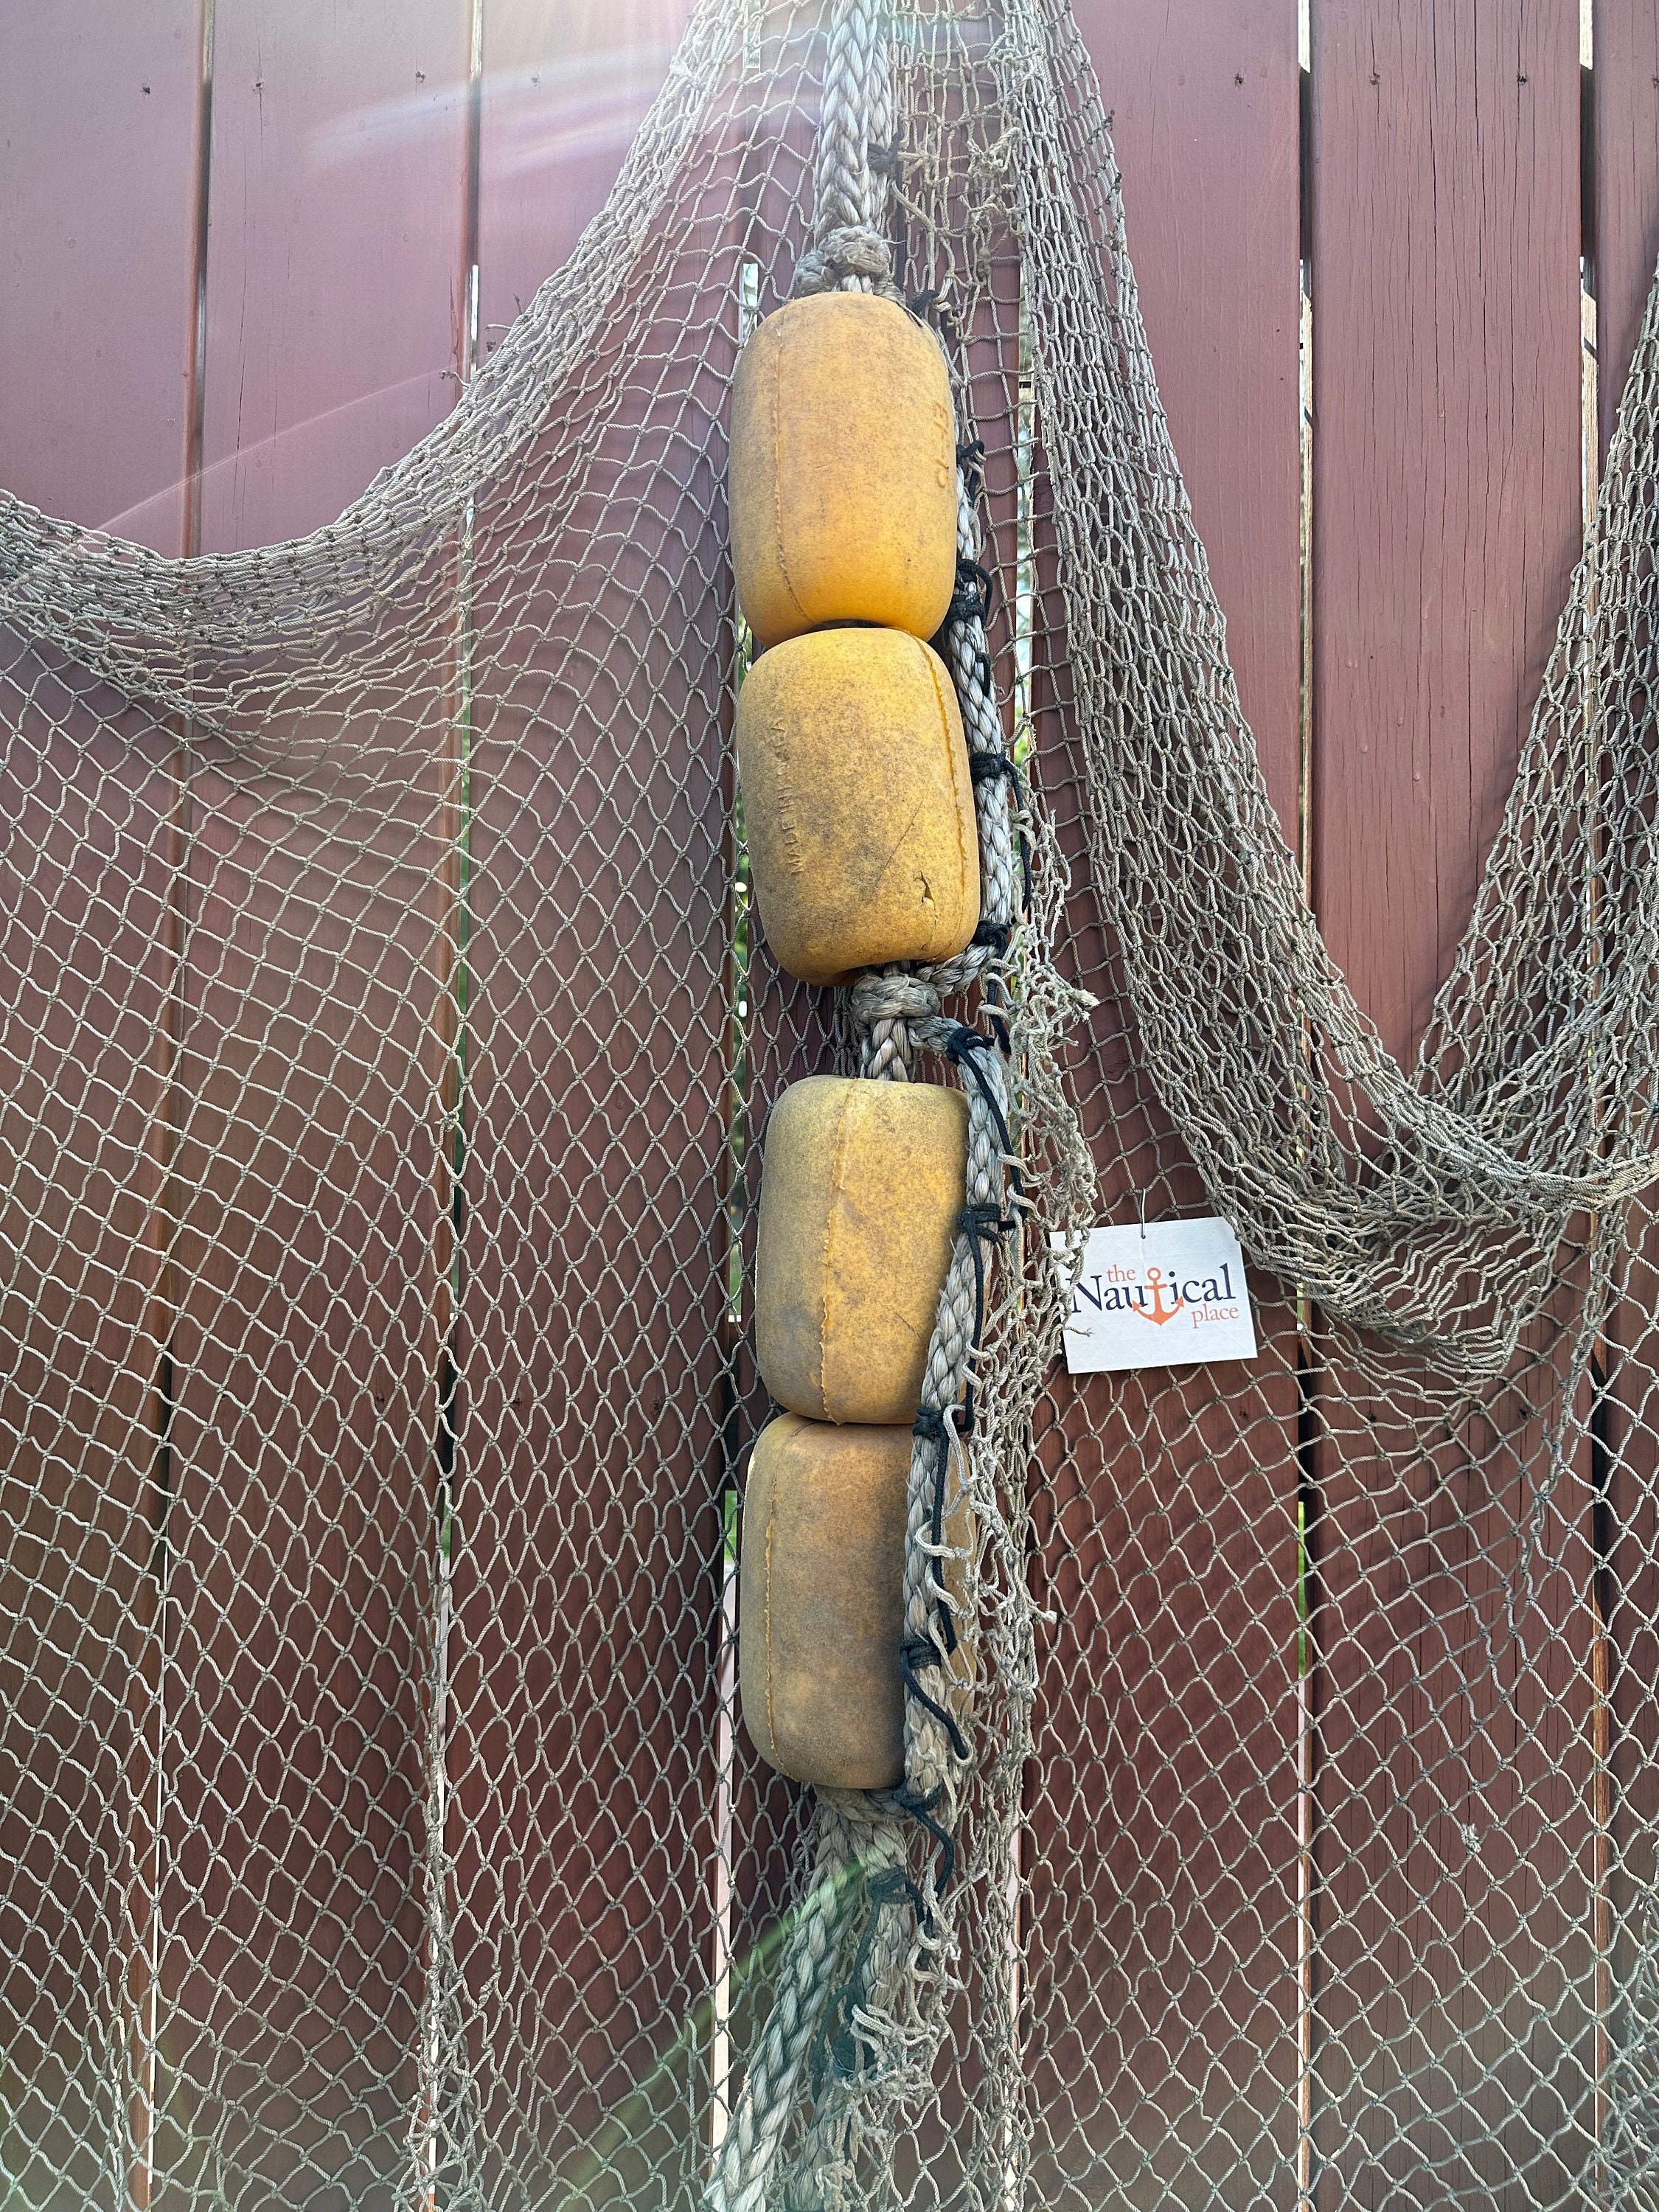 Authentic Used Fishing Net Floats on Rope 42 Long, Set of 4